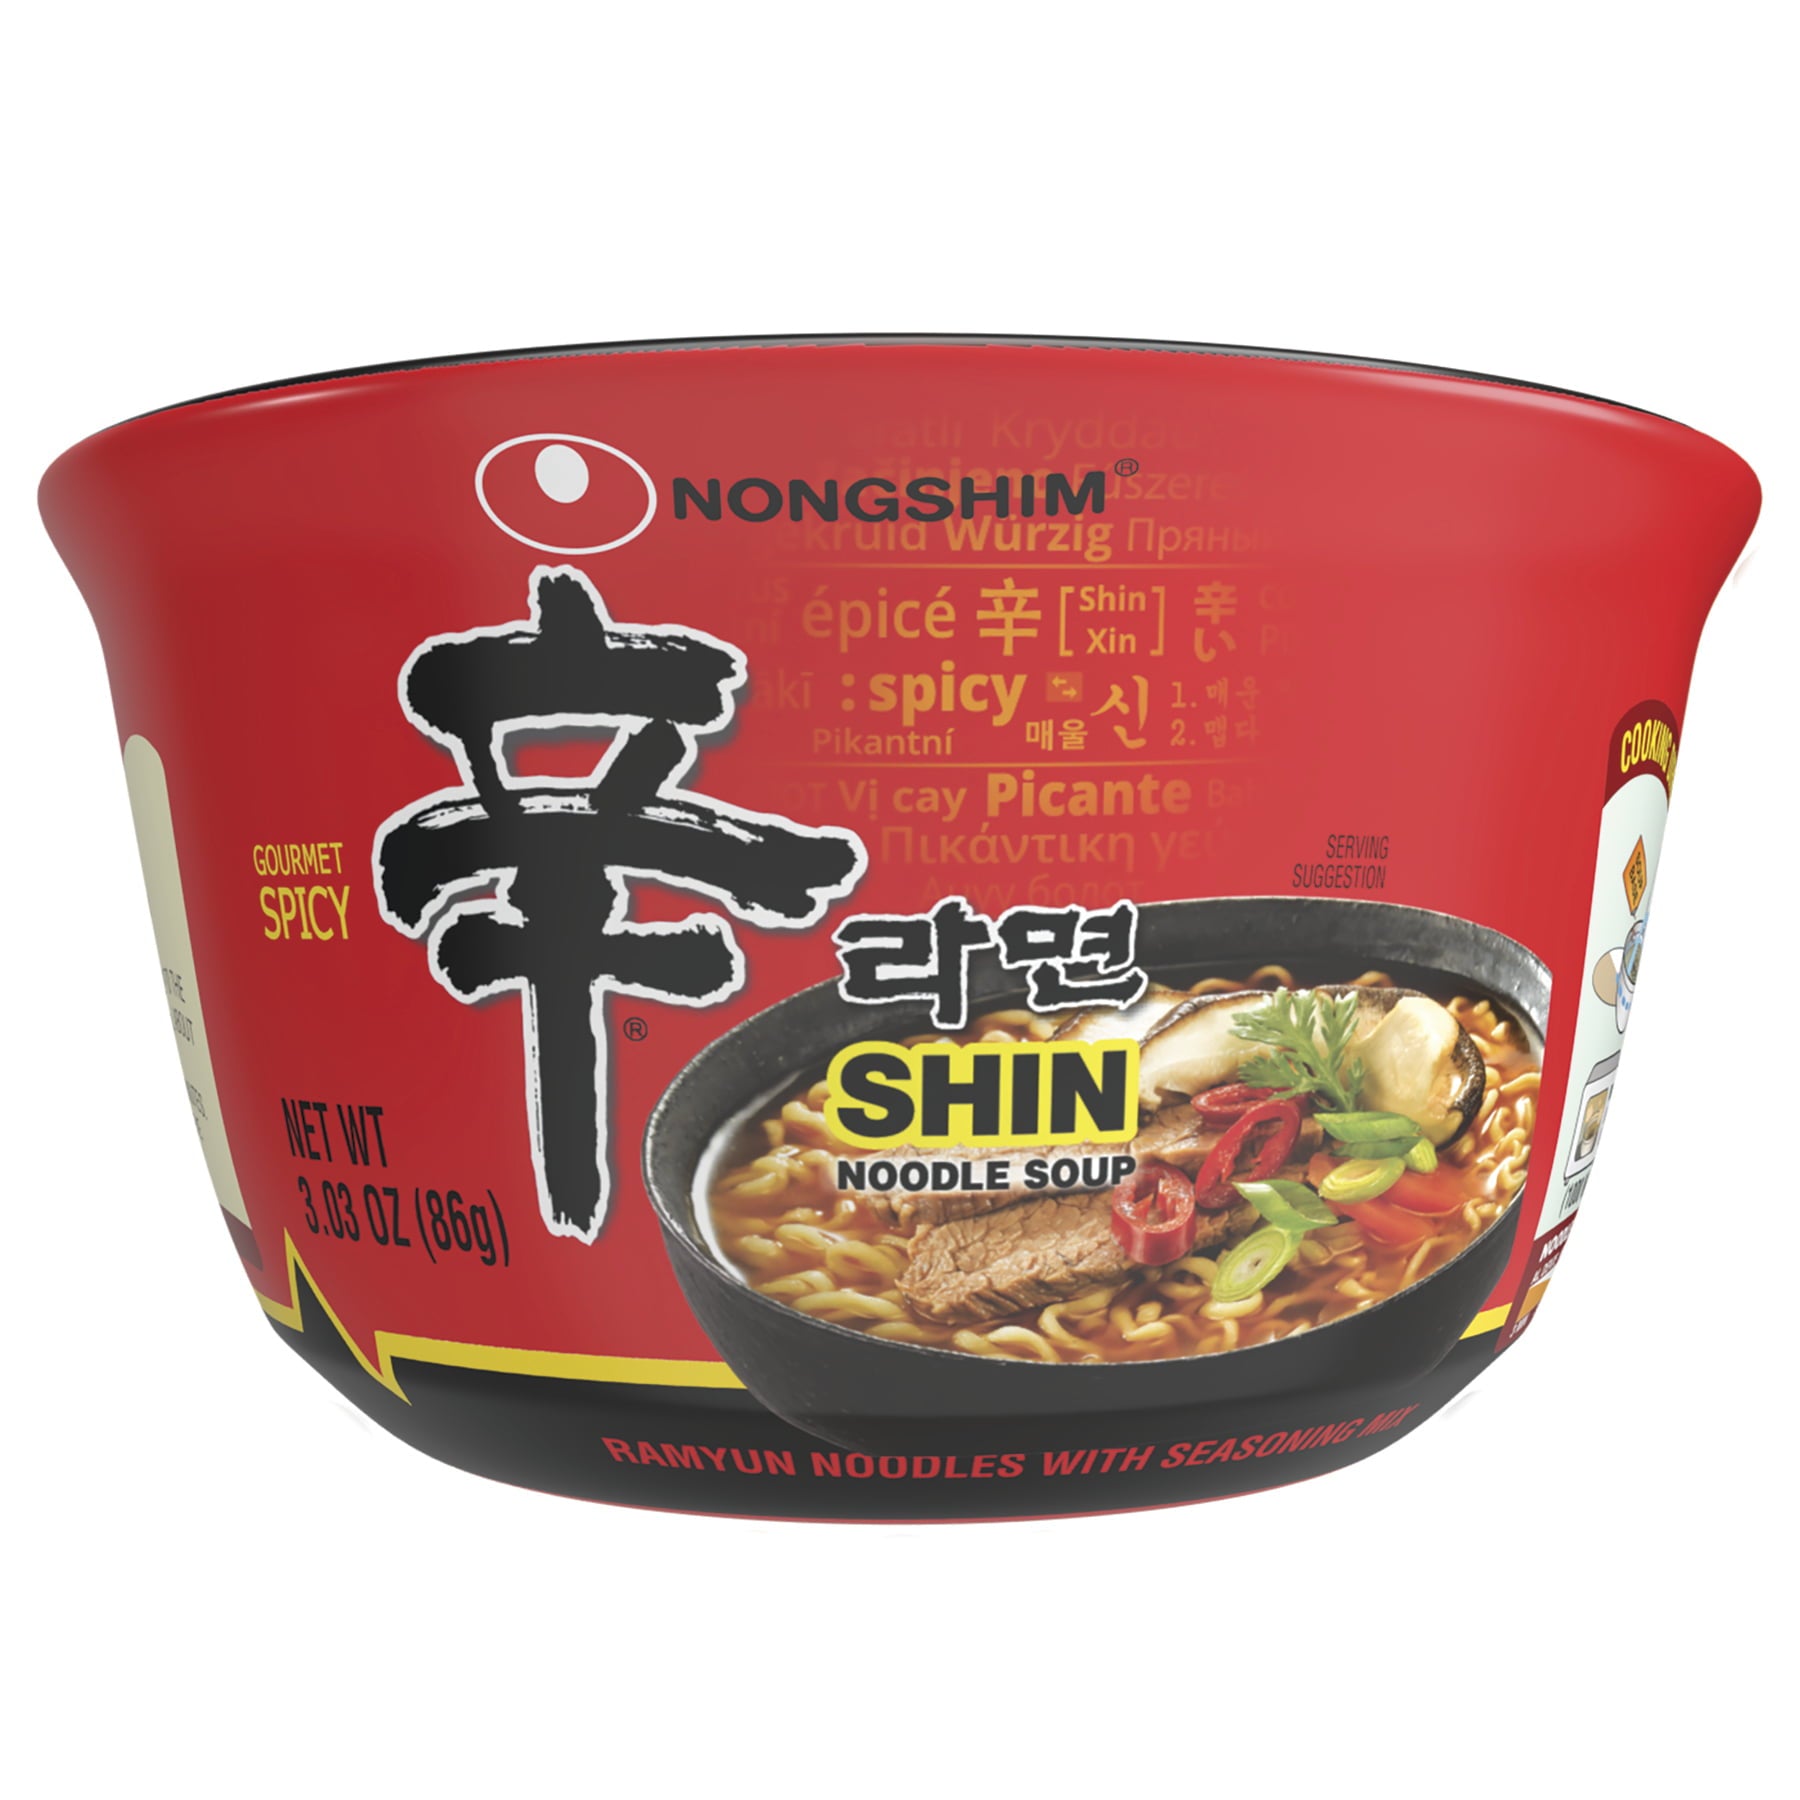 Nongshim releases Shin Ramyun The Red Big Bowl - Pulse by Maeil